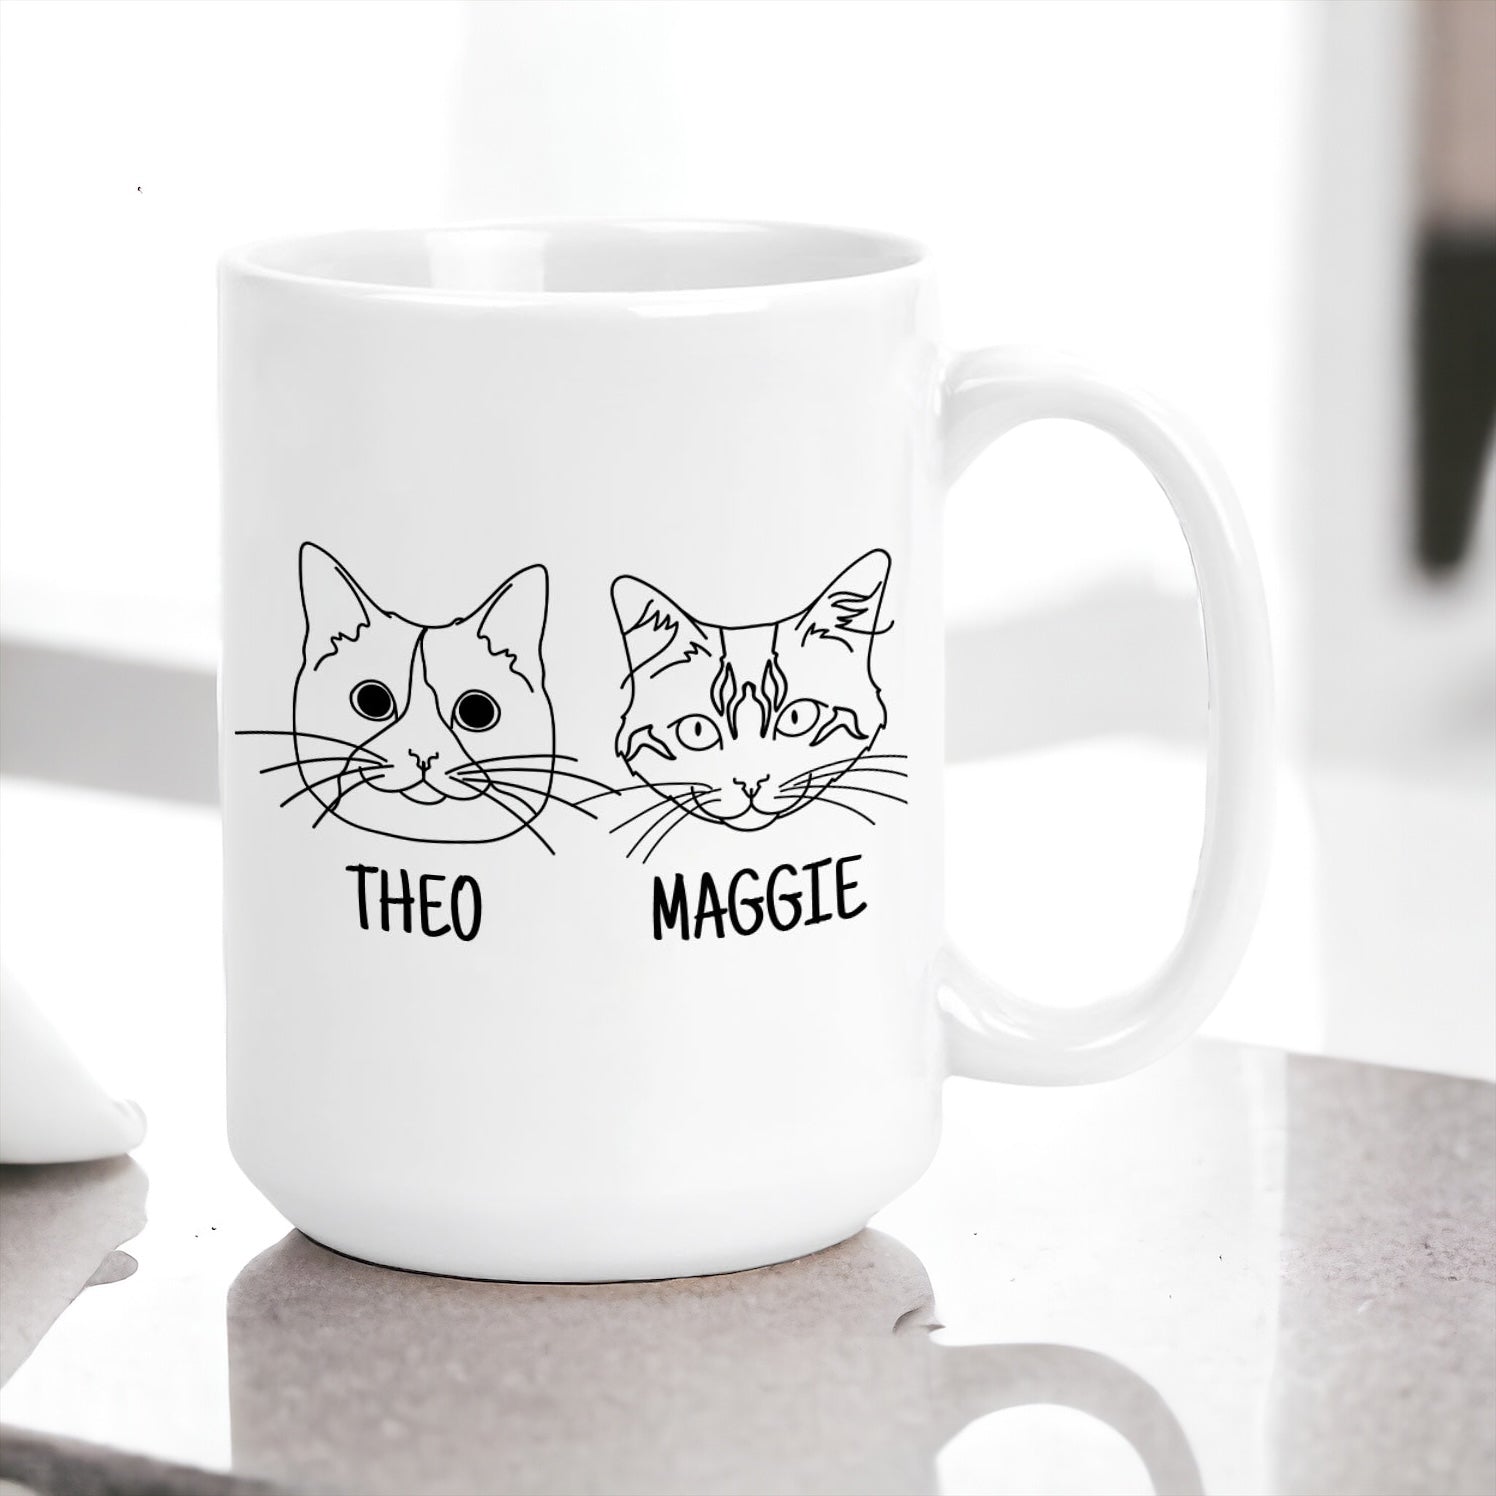 Personalized Cat Breed Faces with Cat Names - Custom 15oz Ceramic Coffee Mug - Add up to 6 cats!